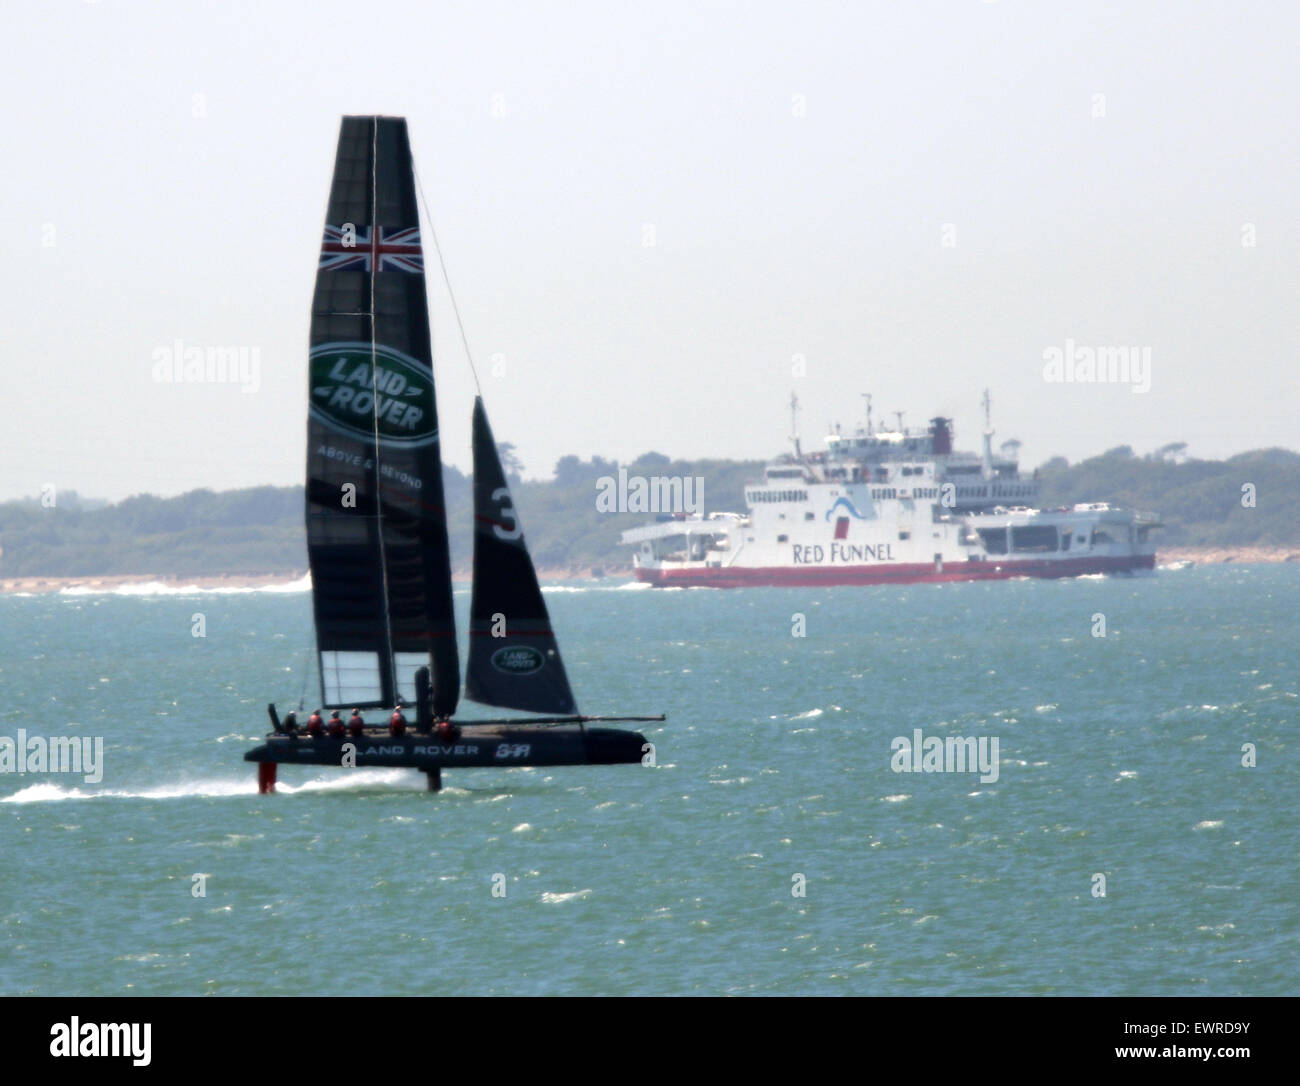 Lee on the Solent, Hampshire, UK. 30th June, 2015. Sir Ben Ainslie didn’t let the baking sunshine stop him from getting out on the water with his new Boat and racing team this morning.   The competitive challenger is out  training for the 35th America’s Cup. Sir Ben aims to win the oldest trophy in sport and bring the Cup back to Britain where it all began over 160 years ago. The Sportsman and his crew of ten spent the morning racing in the Solent watched by many people trying to keep cool on the beach.    Credit:  uknip/ Alamy Live News Stock Photo